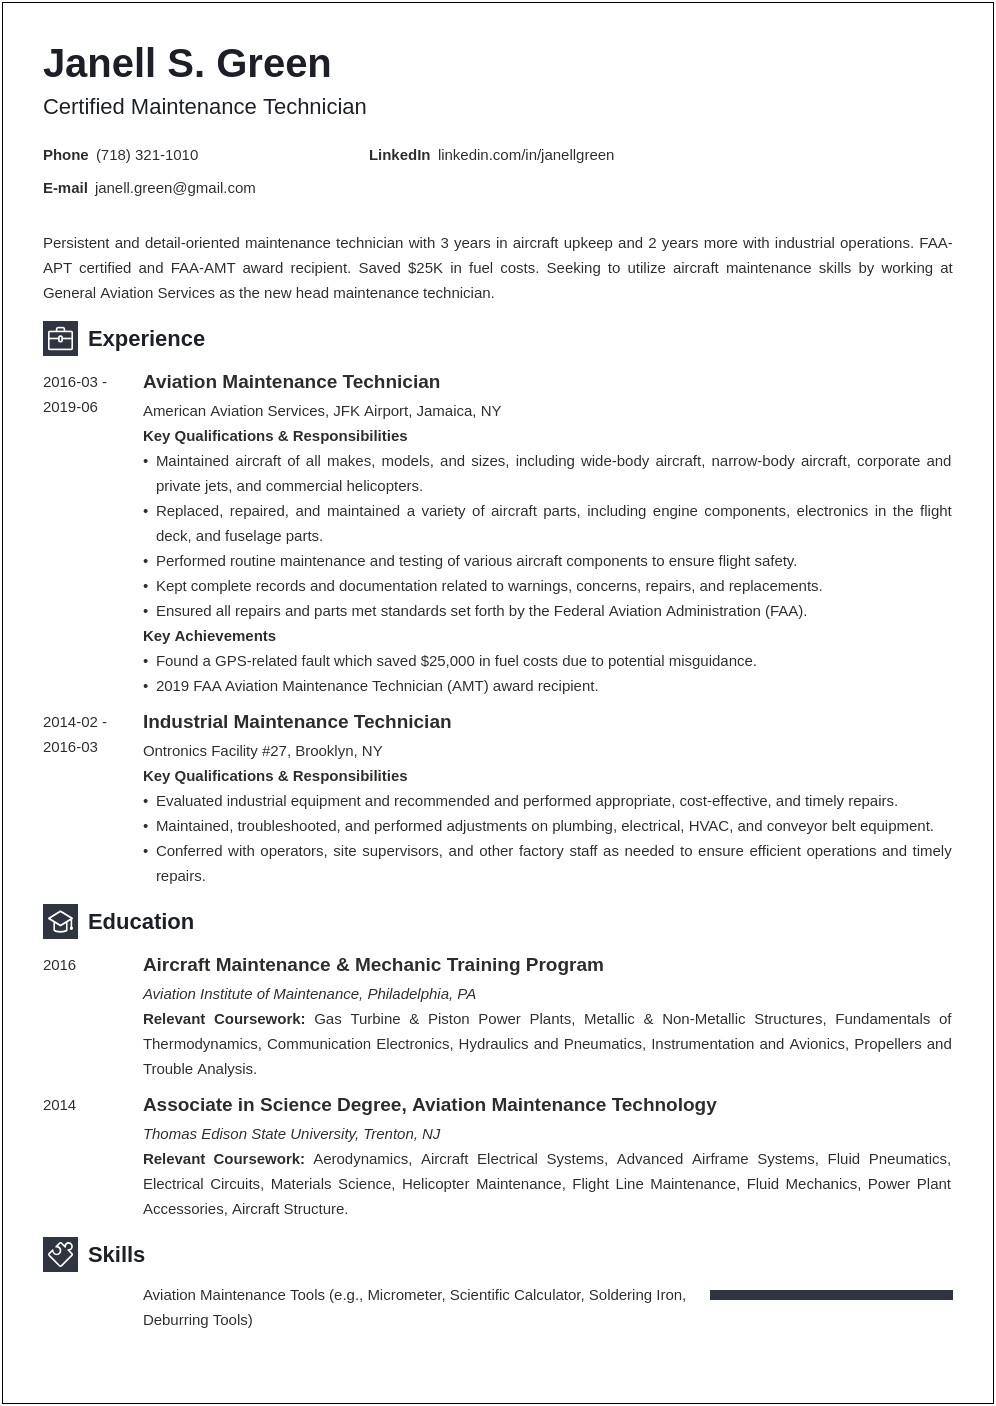 Residential Maintenance Skill And Abilities For A Resume